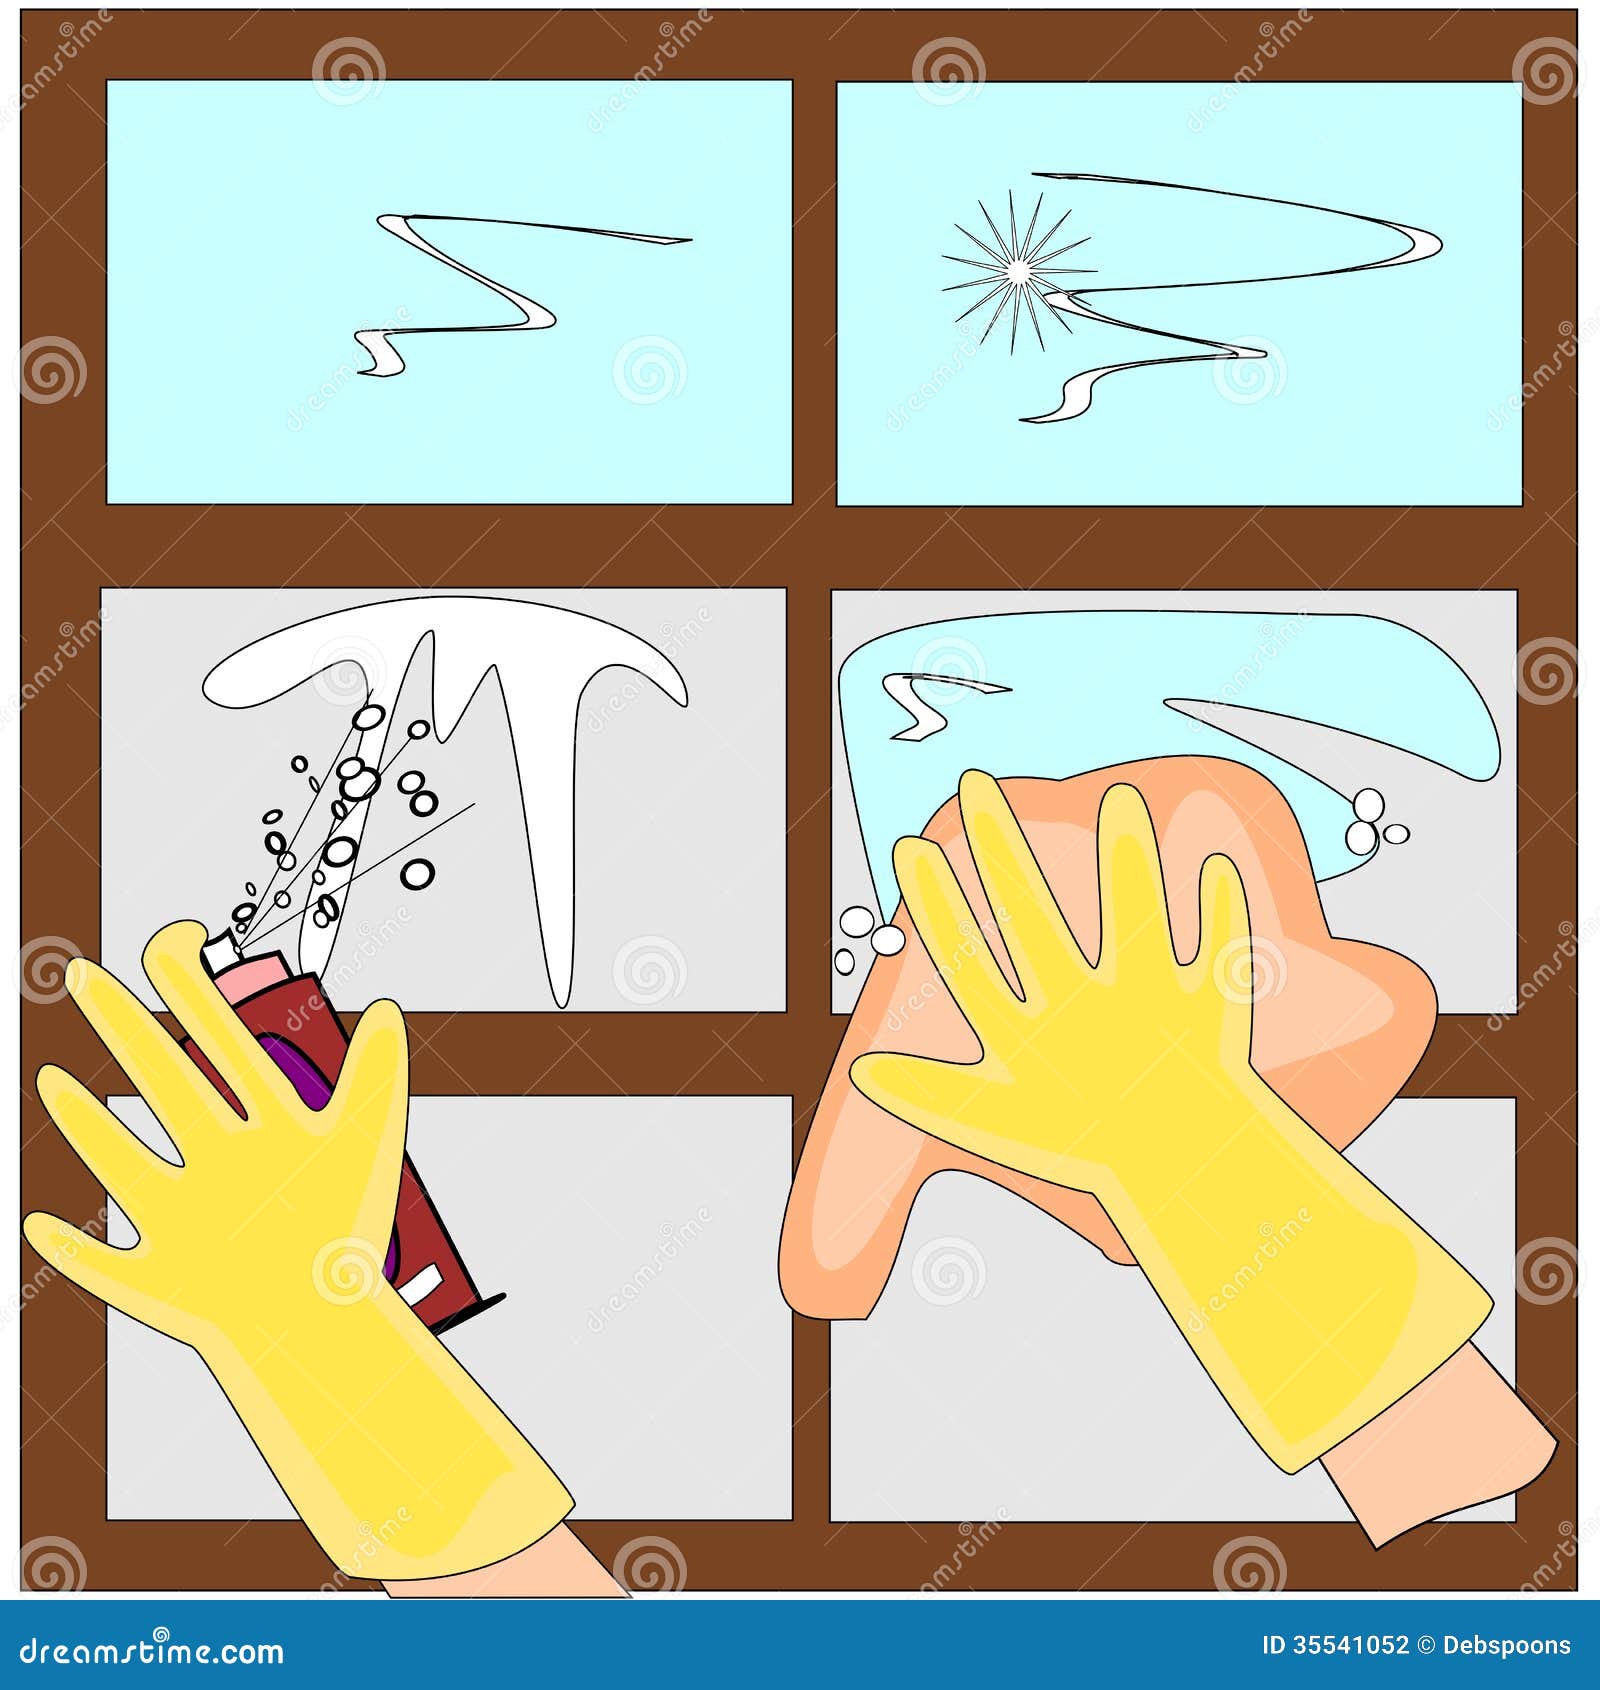 clip art for window cleaning - photo #48